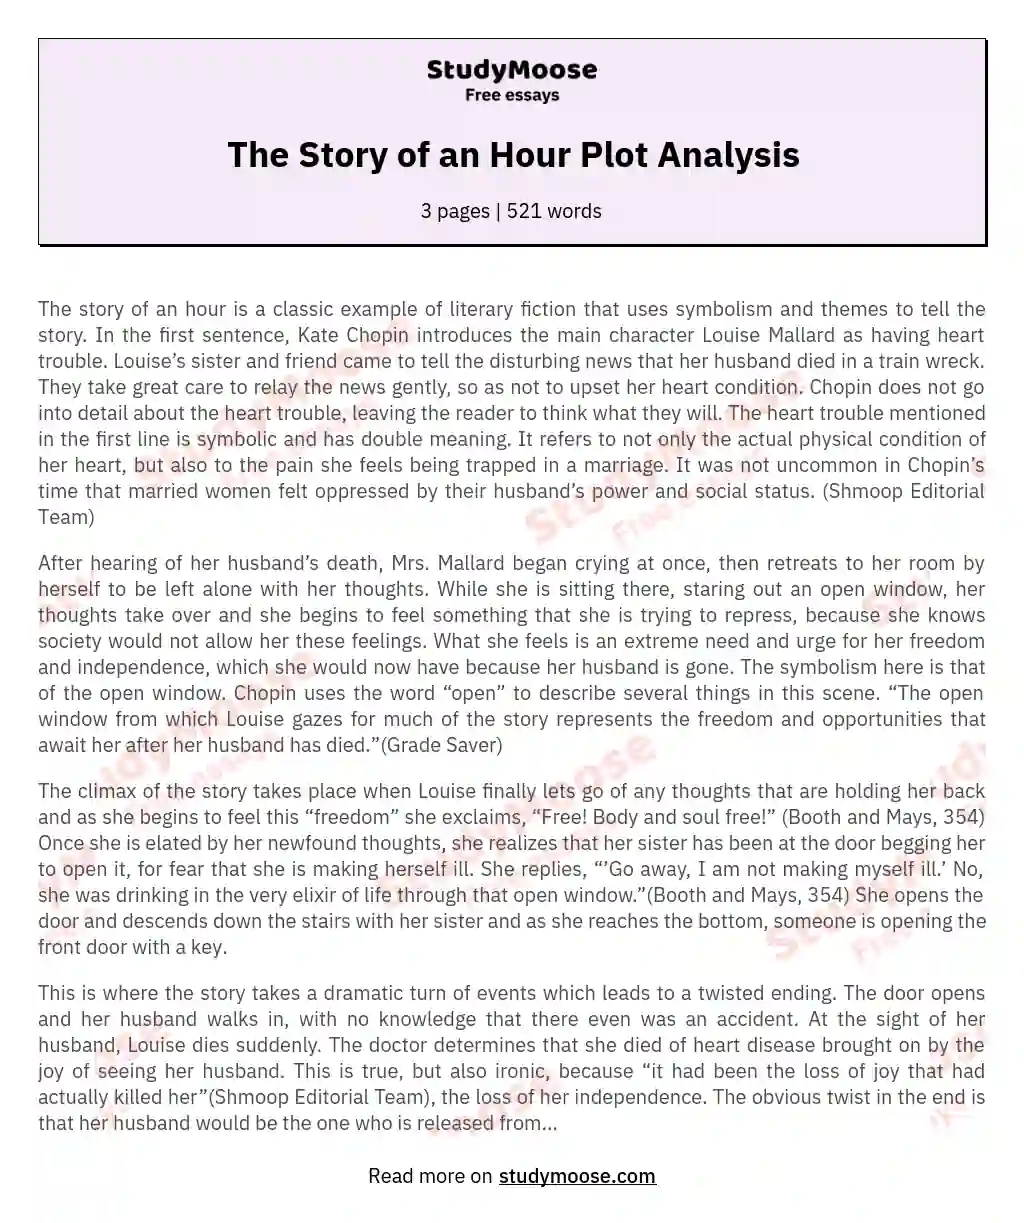 The Story of an Hour Plot Analysis essay